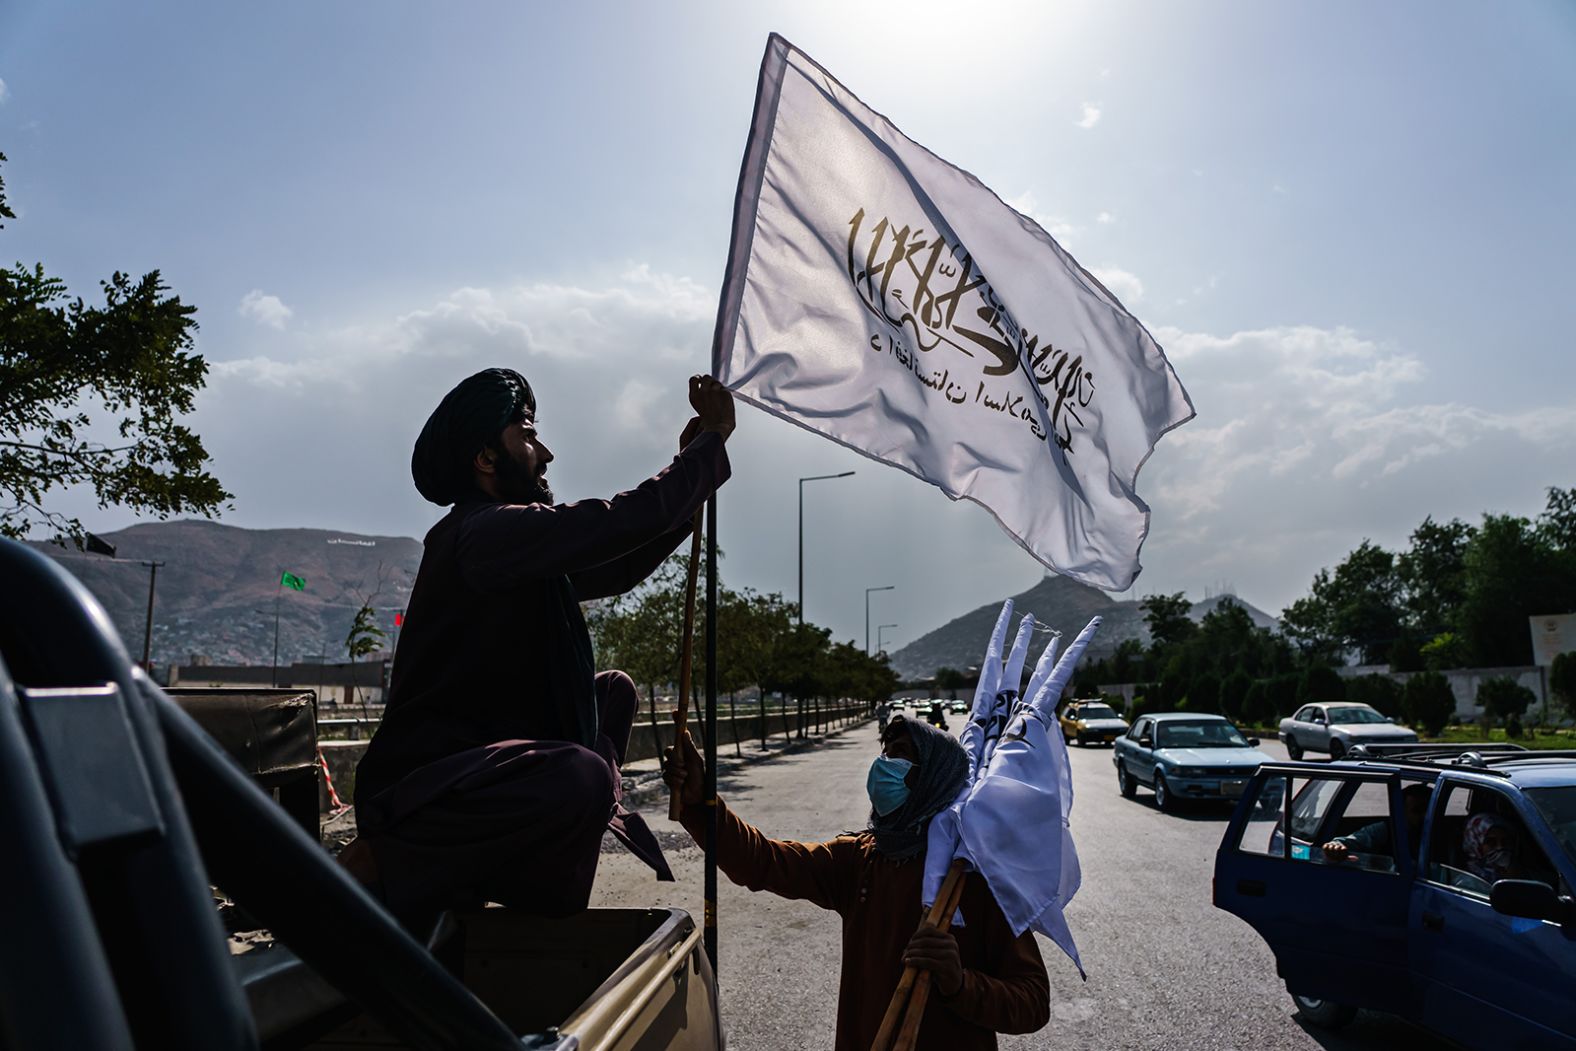 A boy sells Taliban flags to put on vehicles in the middle of a Kabul intersection on August 20.